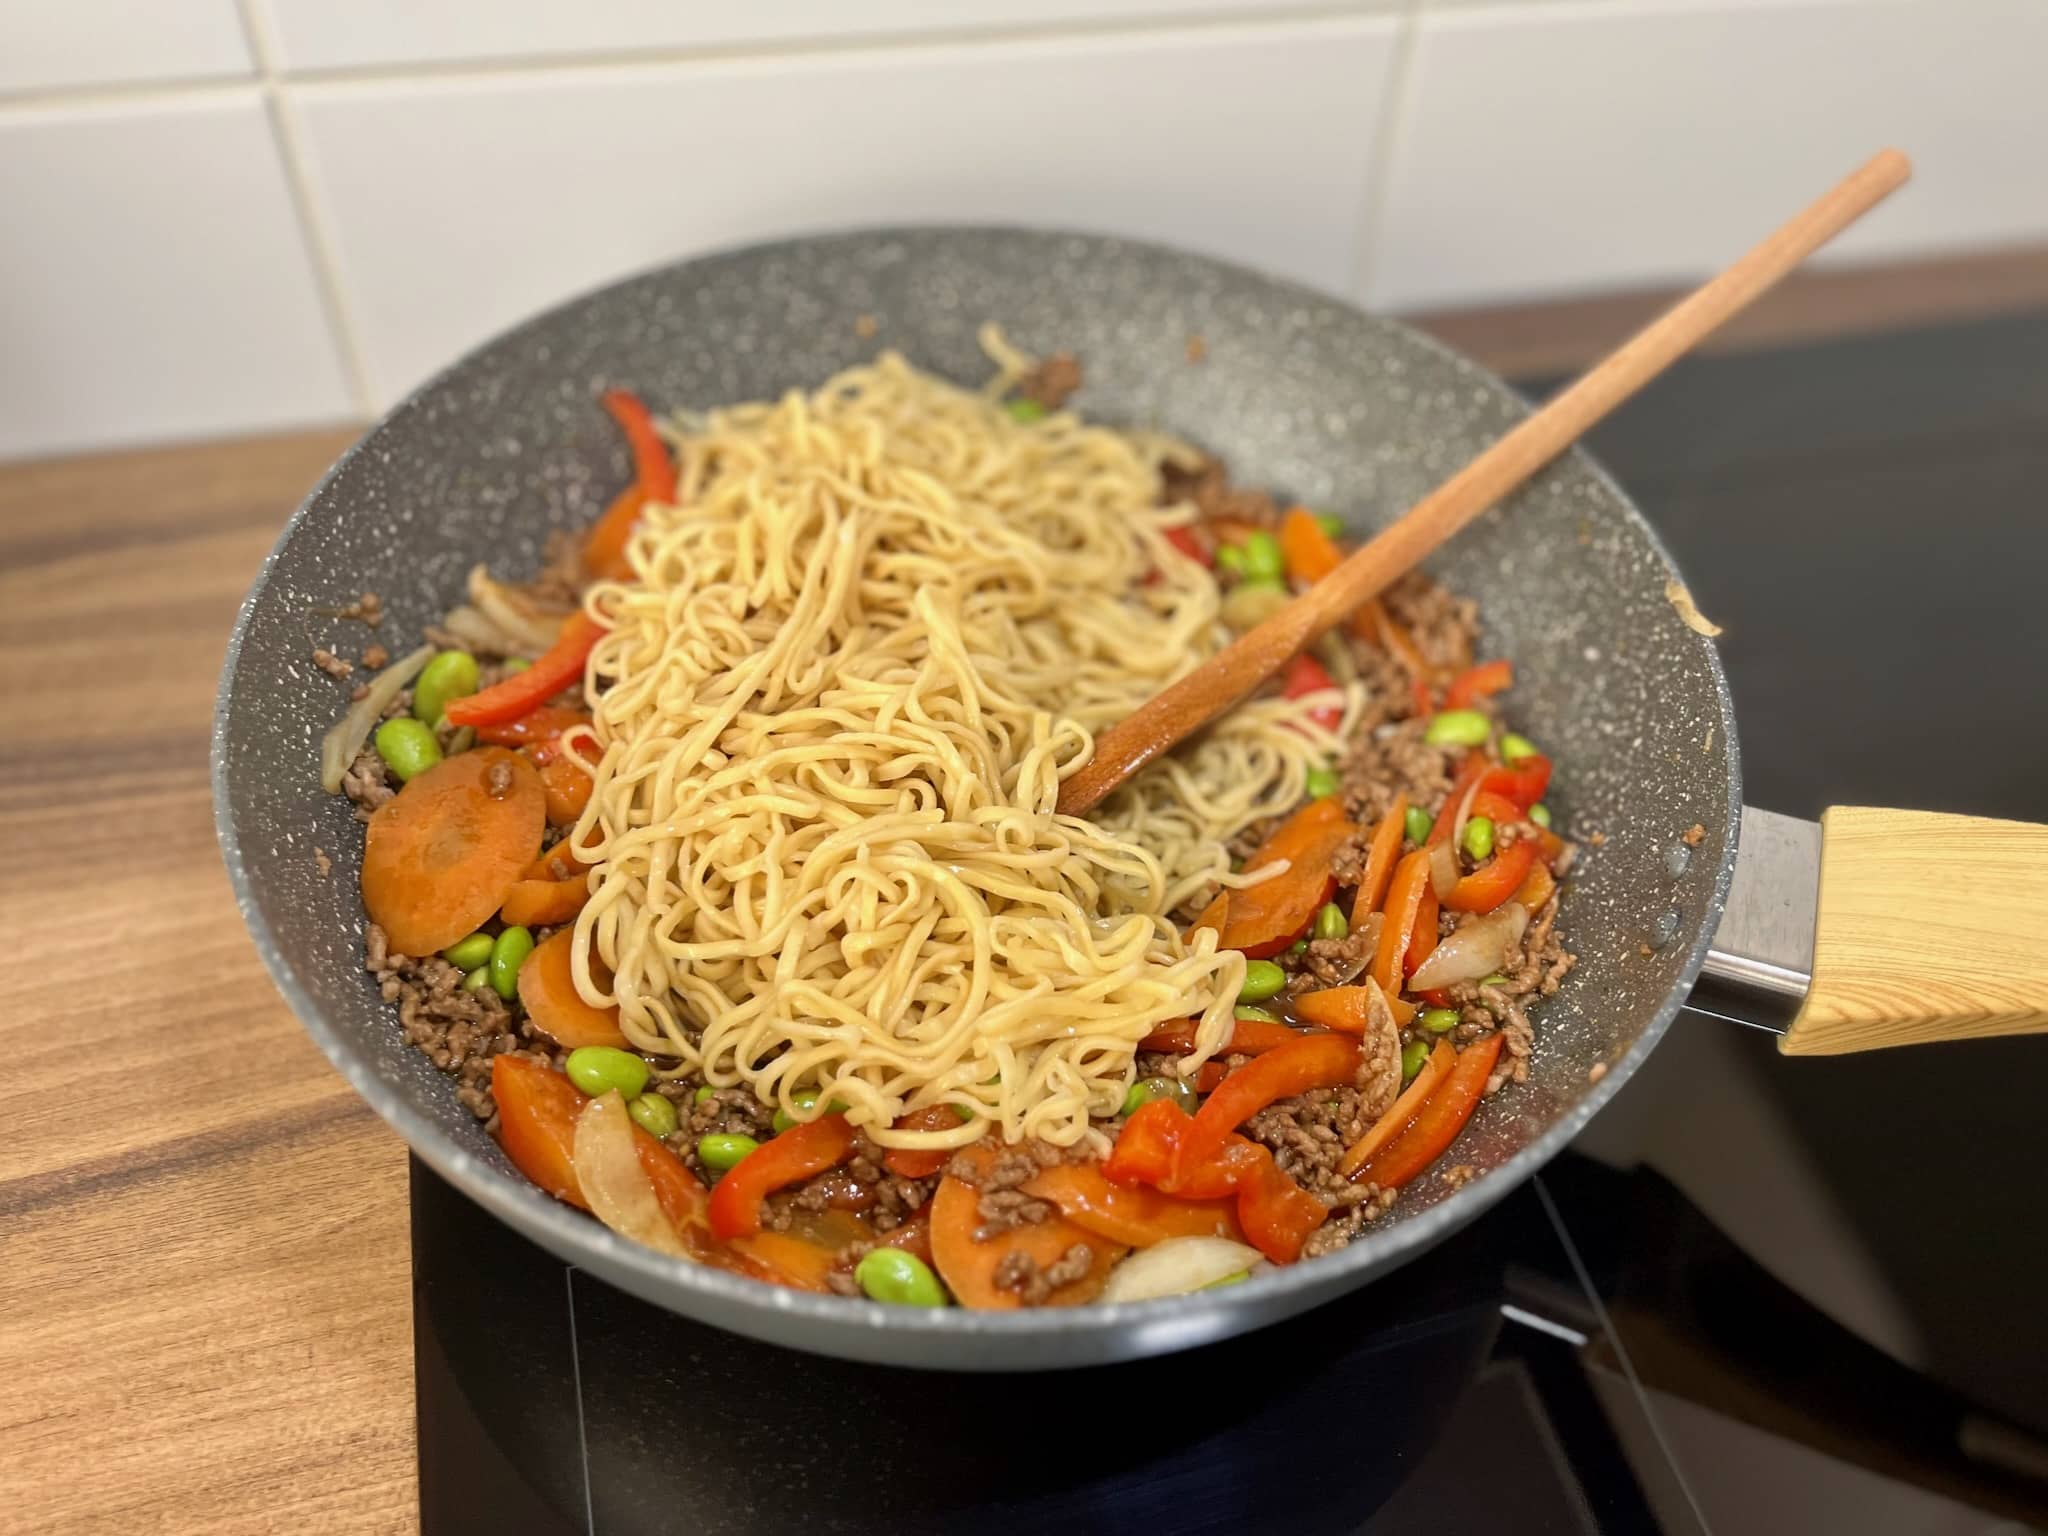 Cooked egg noodles are added to the vegetables and ground beef in the pan